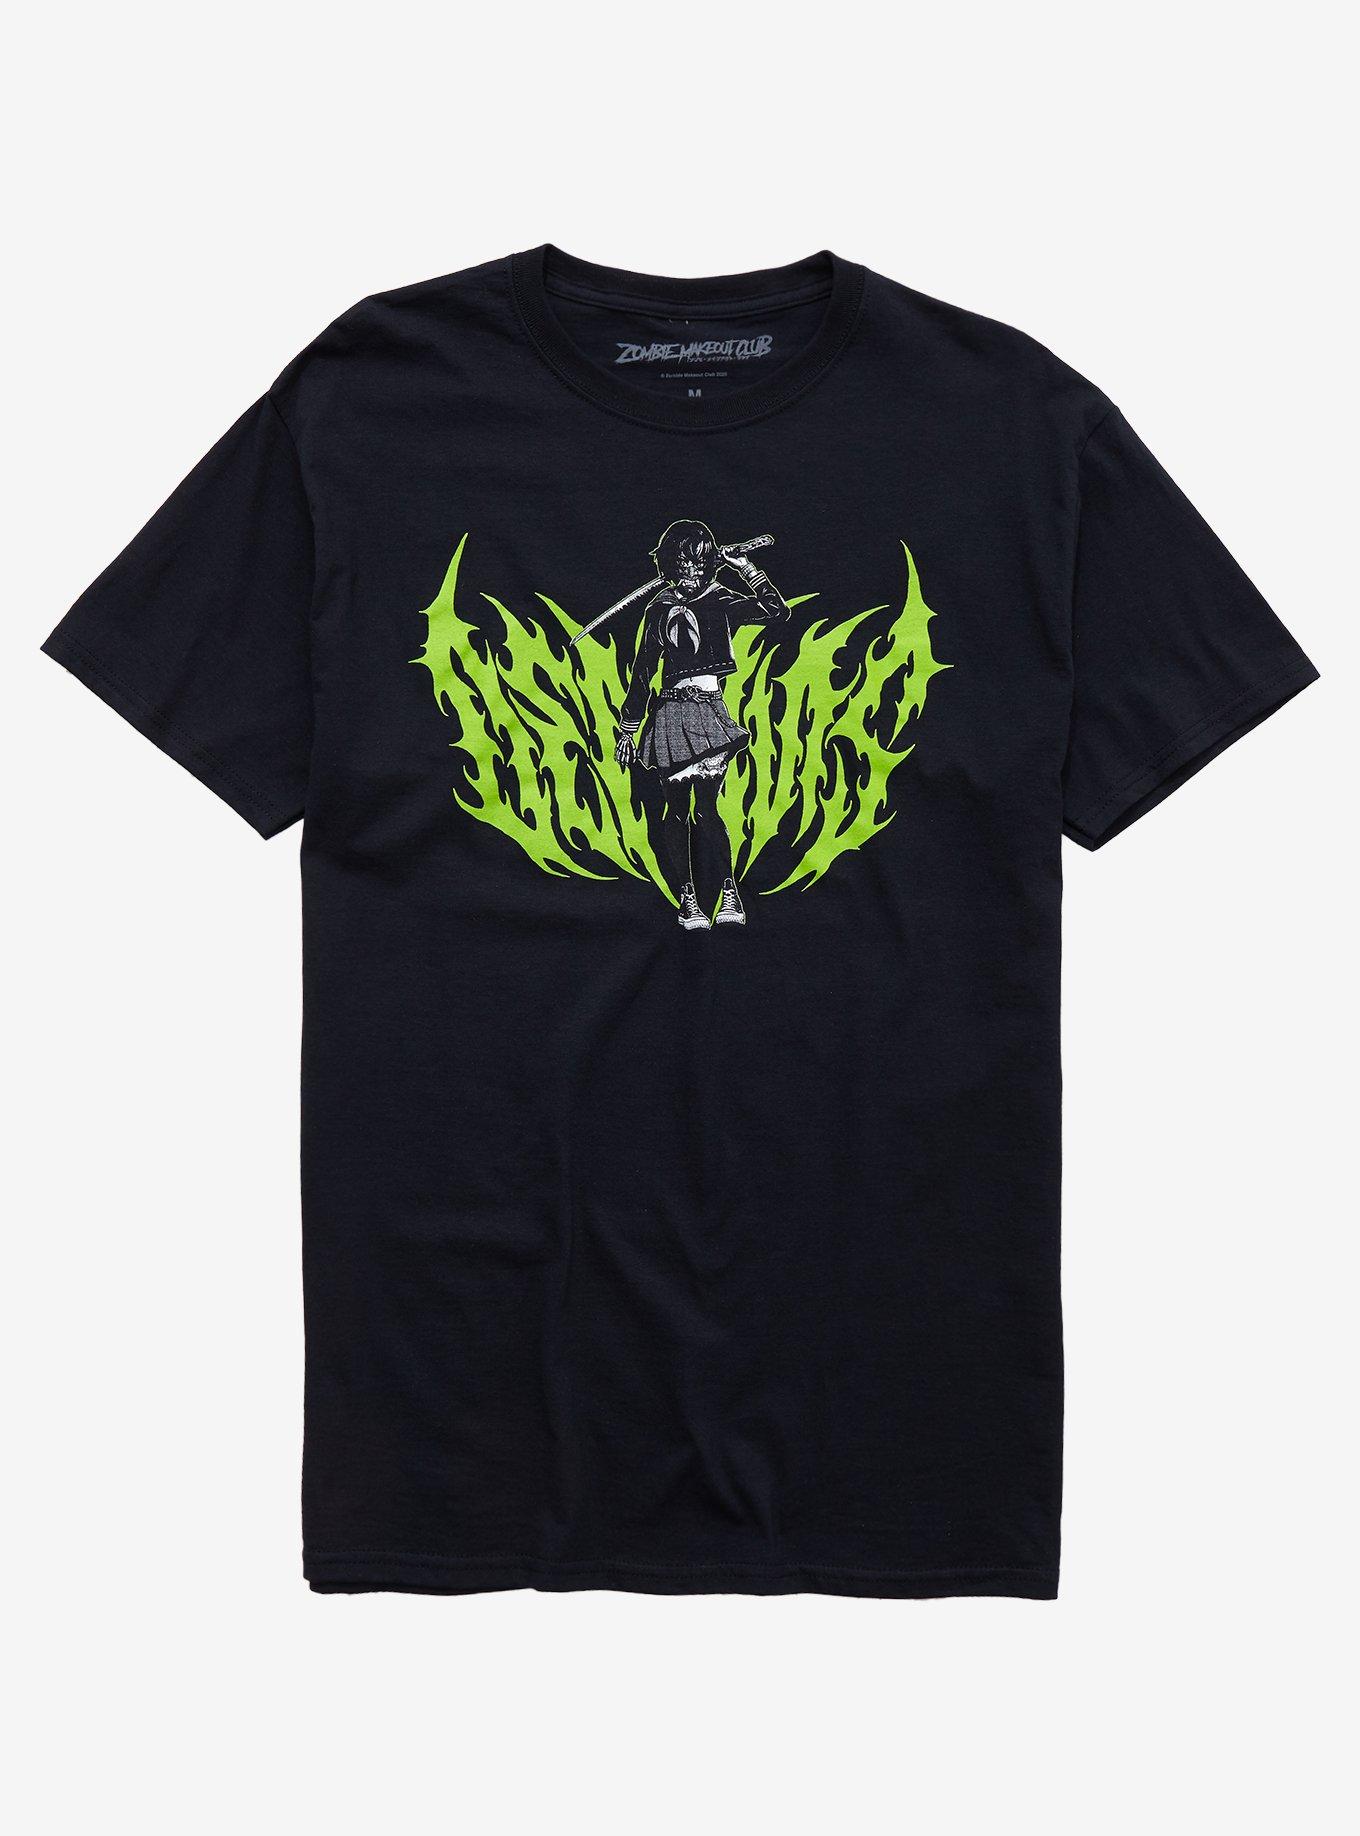 Zombie Makeout Club Demons T-Shirt, NEON GREEN, hi-res